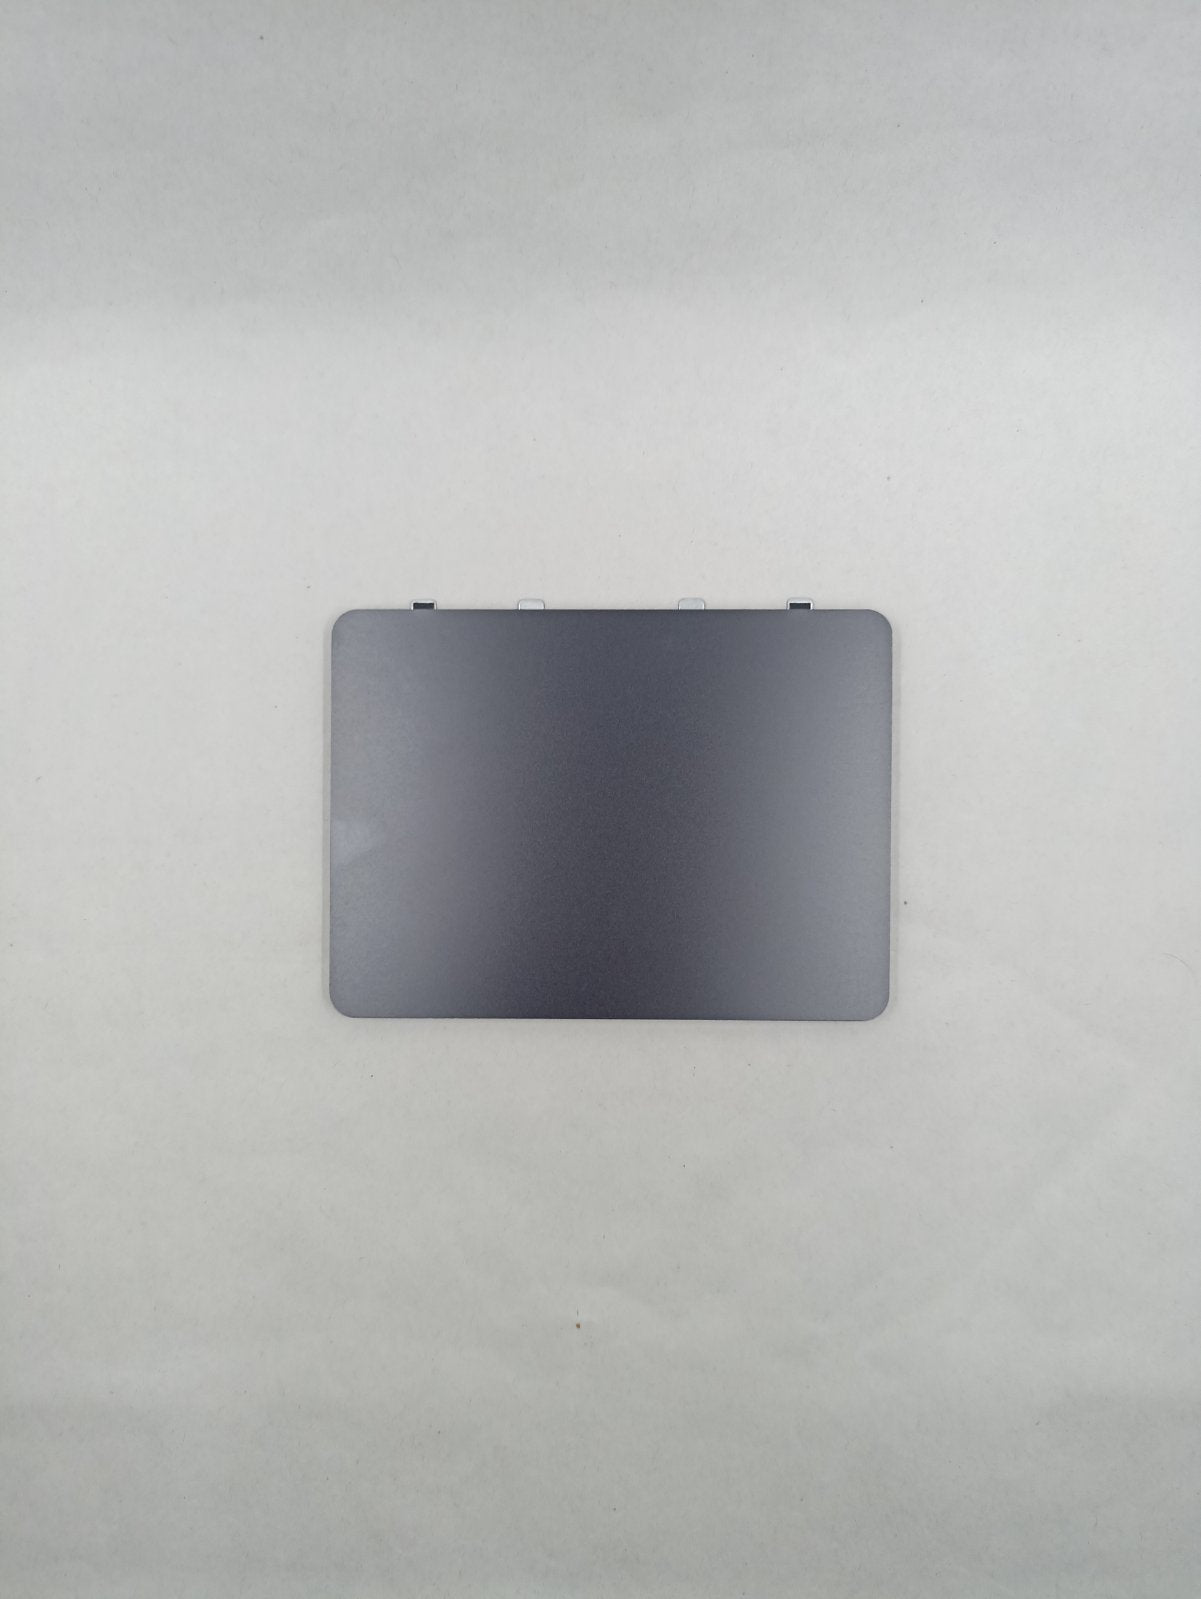 Replacement Touch Pad Module for Acer A315-51 WL